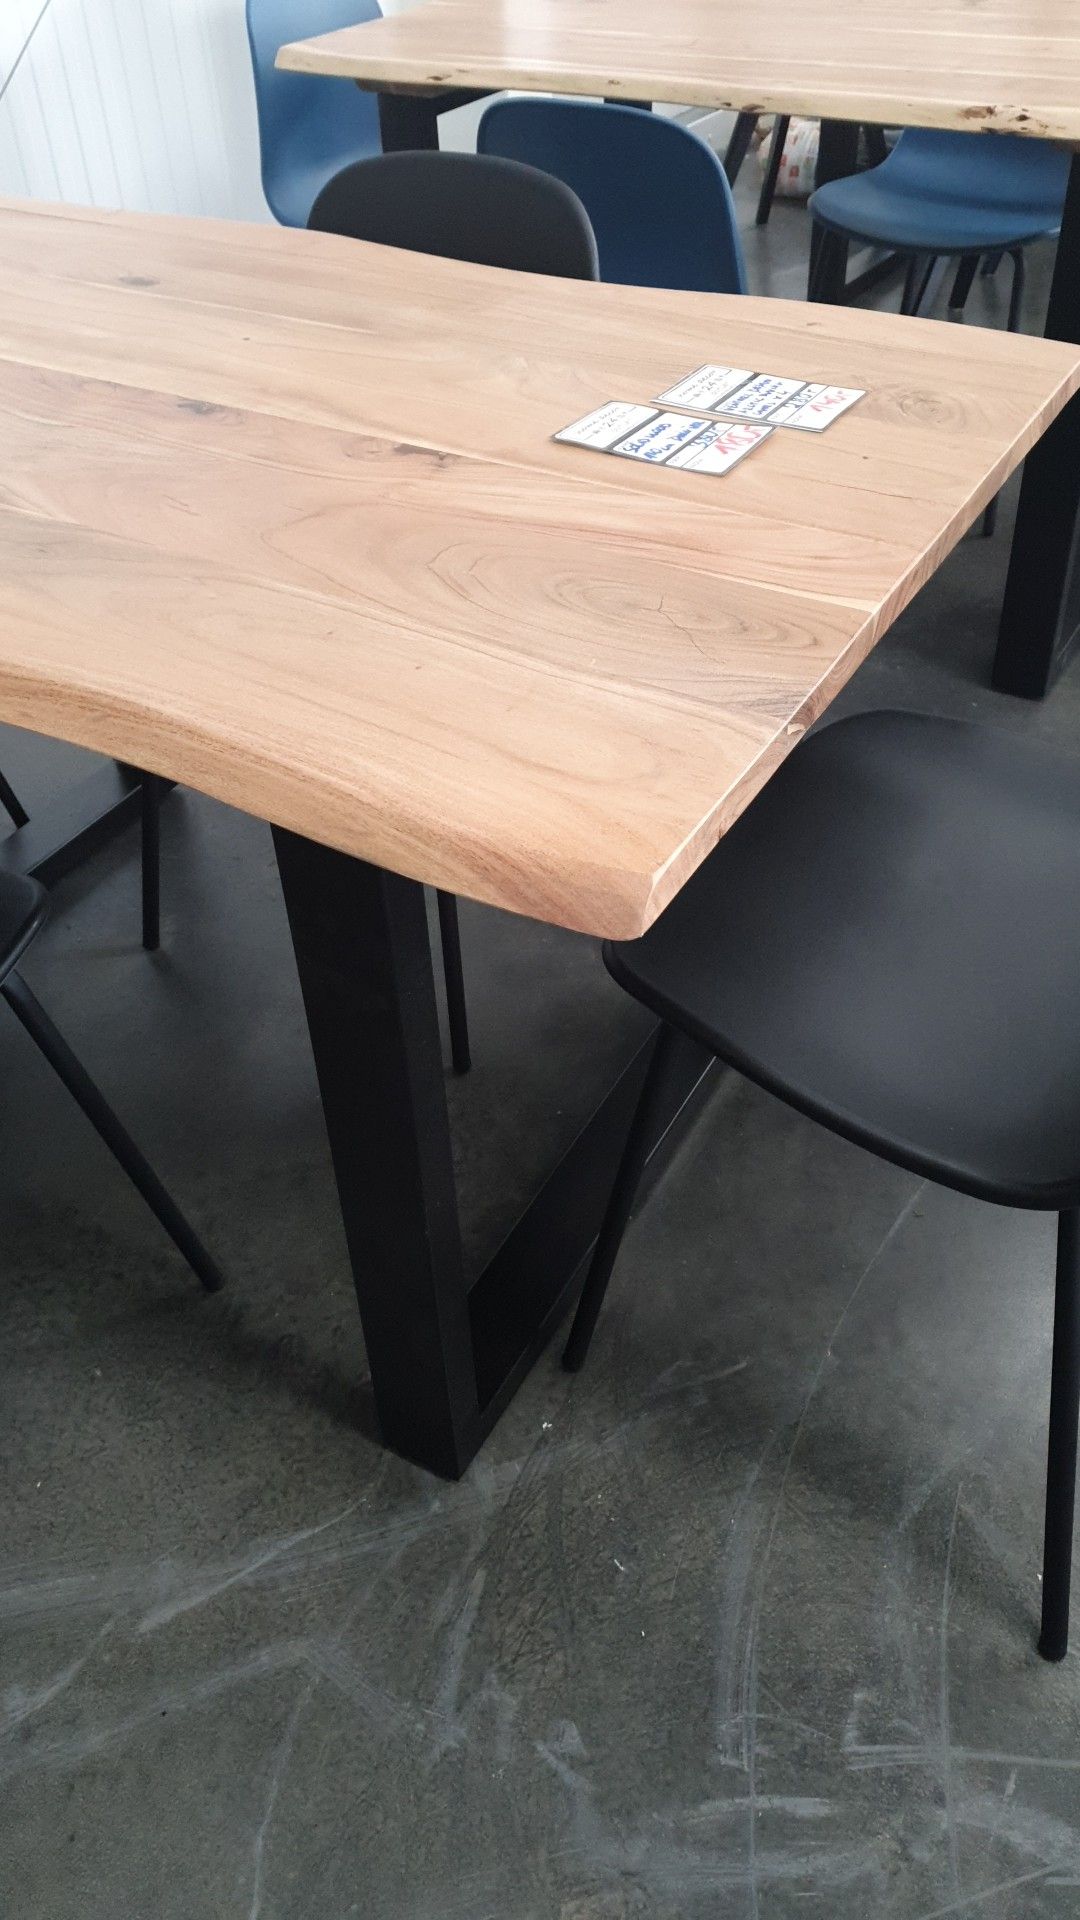 SOLID WOOD 140CM DINING TABLE WITH 4 DINING CHAIRS RRP £680 *PLUS VAT* - Image 2 of 3